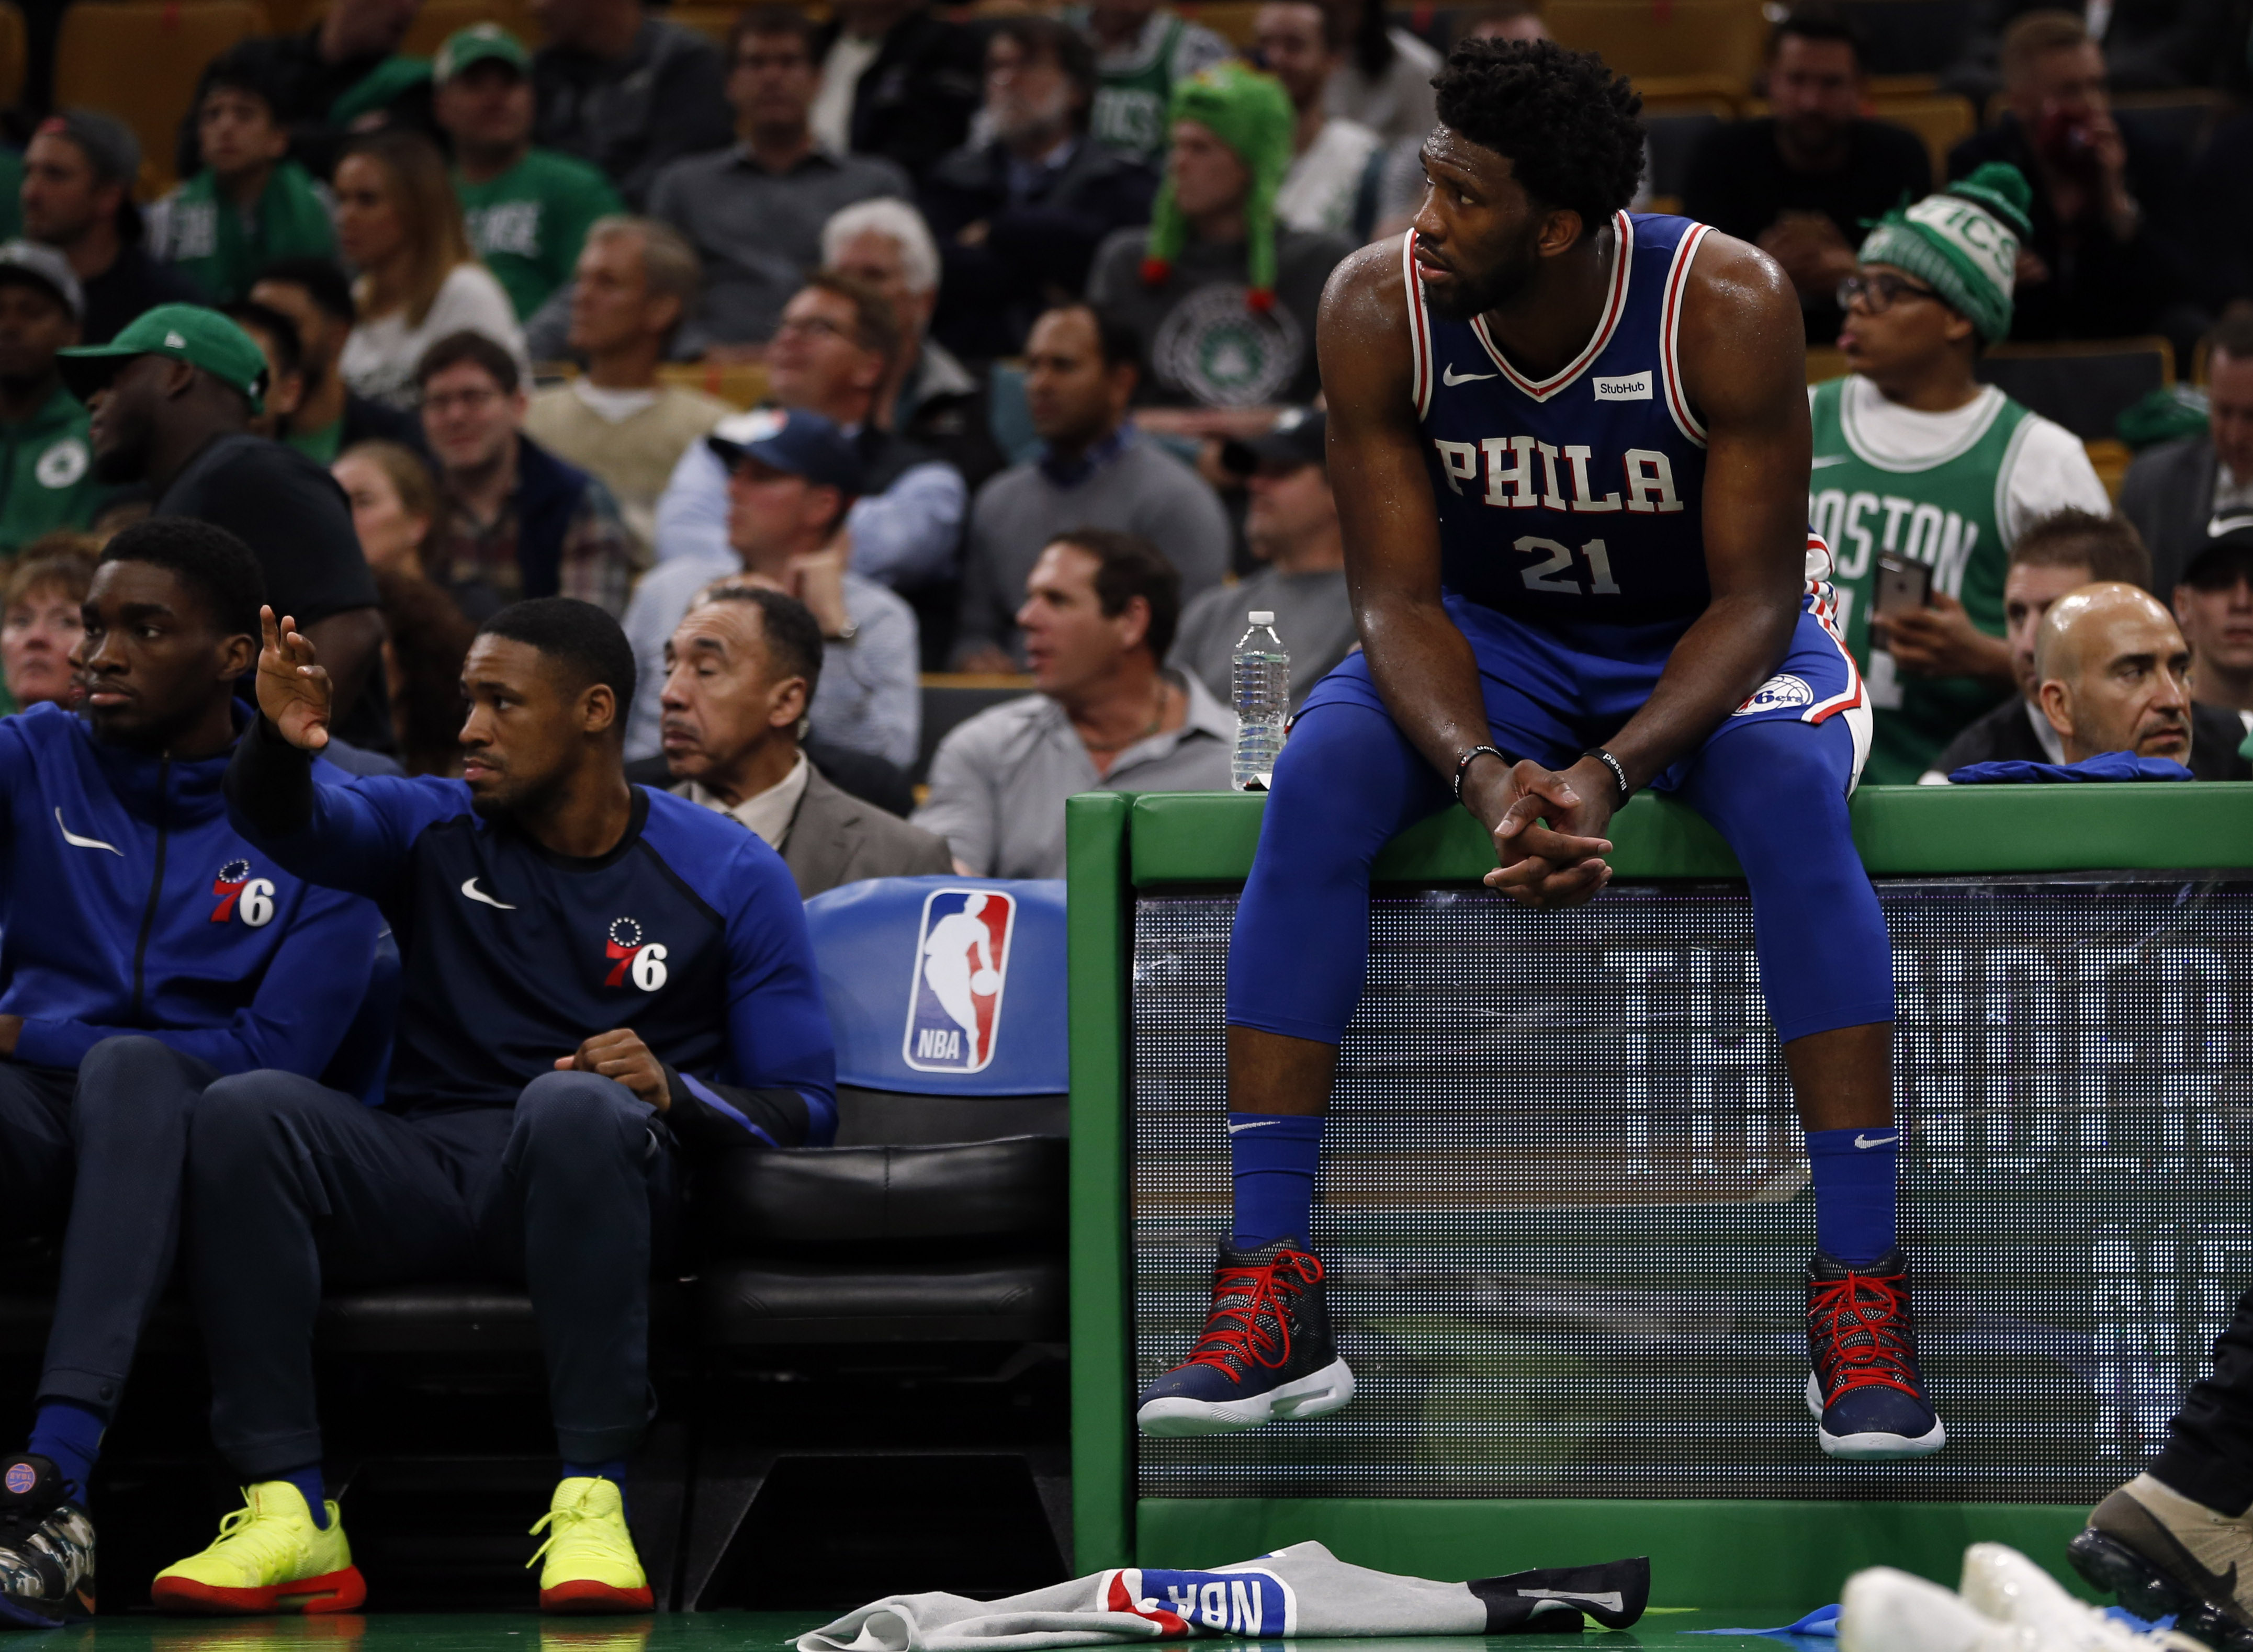 “They Always Kick Our Ass” – Observations from Celtics 105, Sixers 87